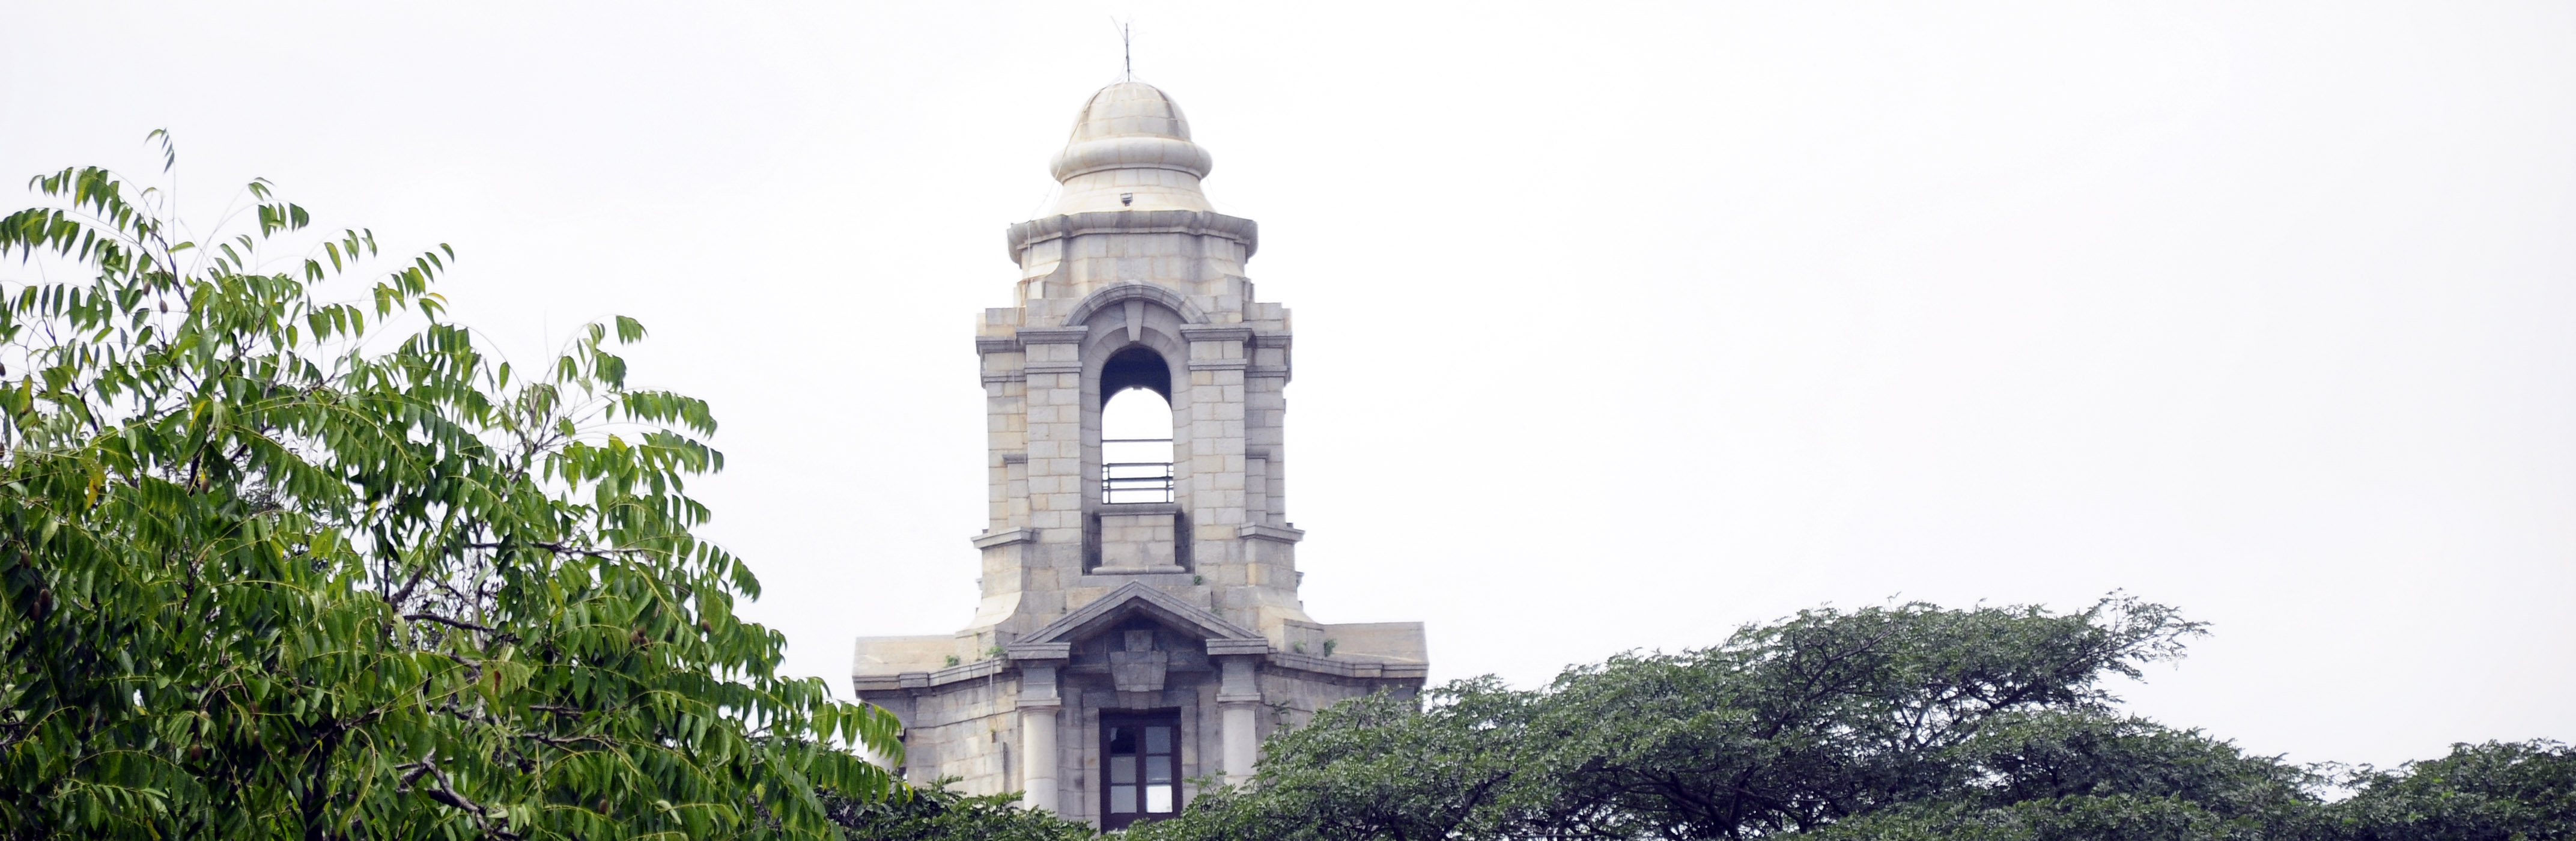 IISc, The Department of Organic Chemistry Image